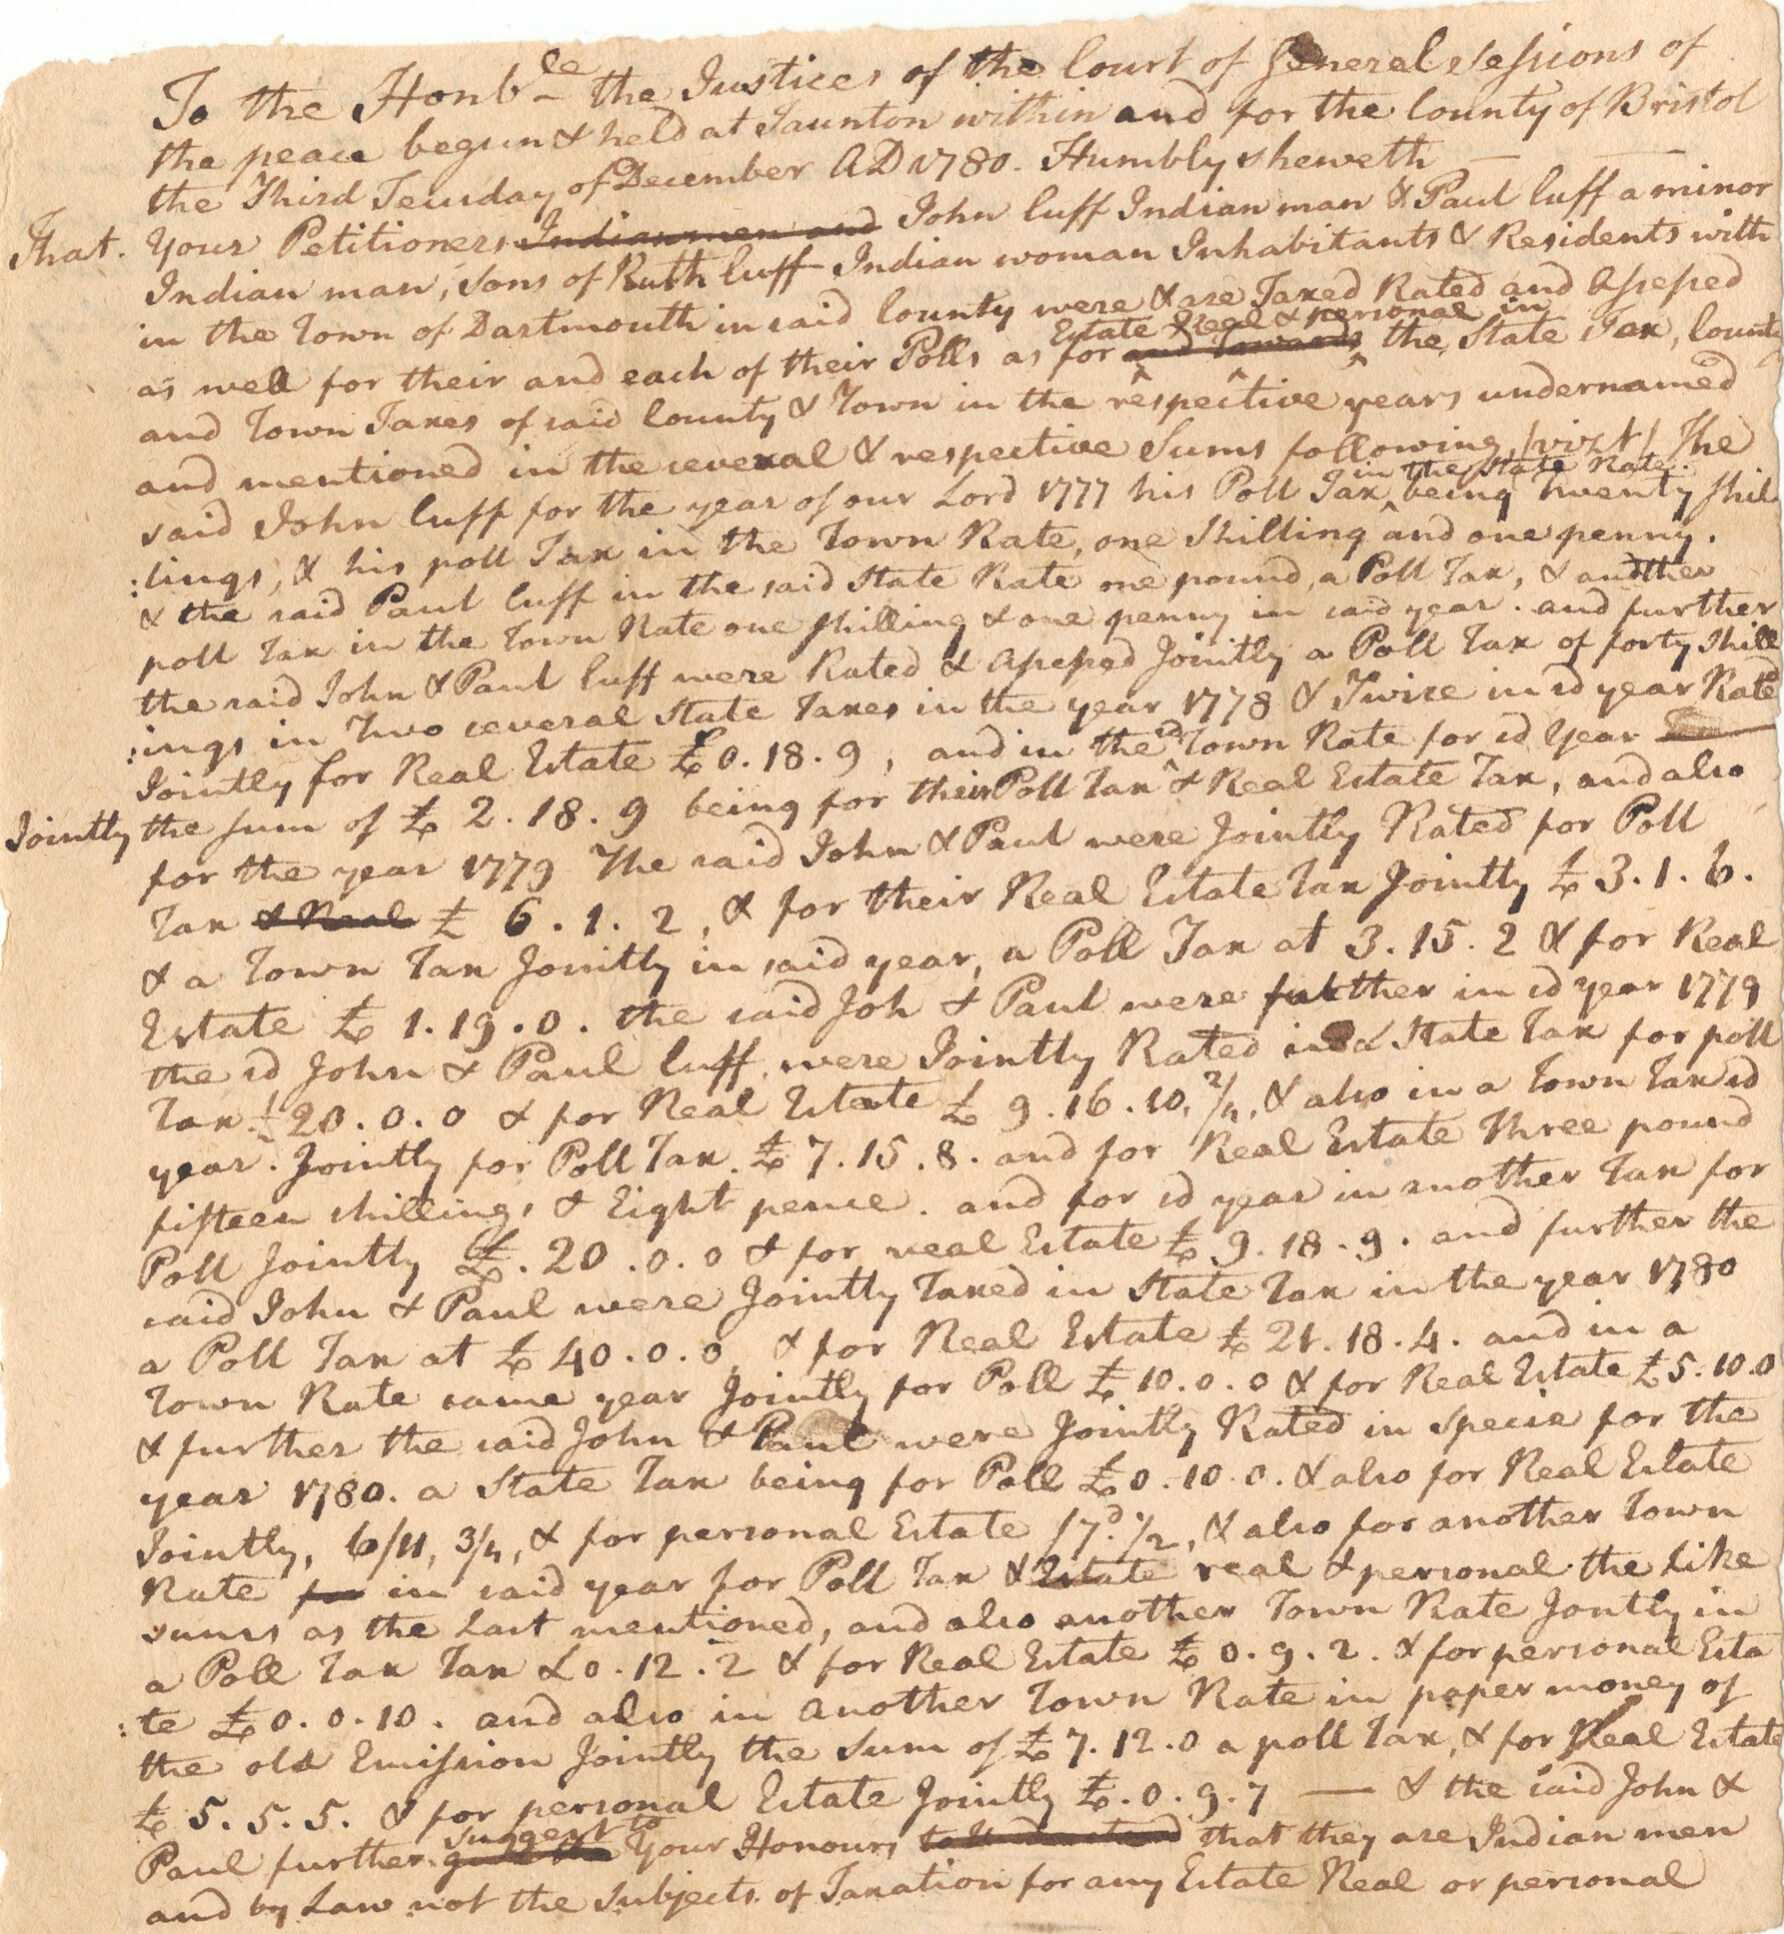 A petition to the court of Bristol County, Massachusetts, in Taunton written by an unidentified hand and signed by John Cuffe and Paul Cuffe. The text is handwritten in black ink on the front and back sides of a single sheet of off-white paper. The petition is in regards to taxation by the state upon the signatories, who being of Native American descent, are arguing they are therefore not subject to such taxation. The document begins [Humbly sheweth that your Petitioners John Cuff Indian man & Paul Cuff a minor Indian man, Sons of Ruth Cuff Indian woman Inhabitants & Residents within the Town of Dartmouth] and the document ends [the said John & Paul further suggest to your Honour that they are Indian men and by Law not the subjects ofTaxation for any Estate Real or personal and Humbly Pray Your Honor that as they are assessed jointly a Double Poll Tax & the said Paul is a minor for whom the said John is not by Law responsible or chargeable that the said Poll Taxes aforesaid and also all and Singular Taxes aforesaid on their and Each of their Real or Personal Estate aforesaid may be Abated to them & they allowed their Reasonable Costs and as in Duty Bound shall pray.]. The signatures of John Cuffe and Paul Cuffe are on the top right section of the verso. Also on the verso are several notations in a different hand, including [The Petition of John and Paul Cuffe] at center.